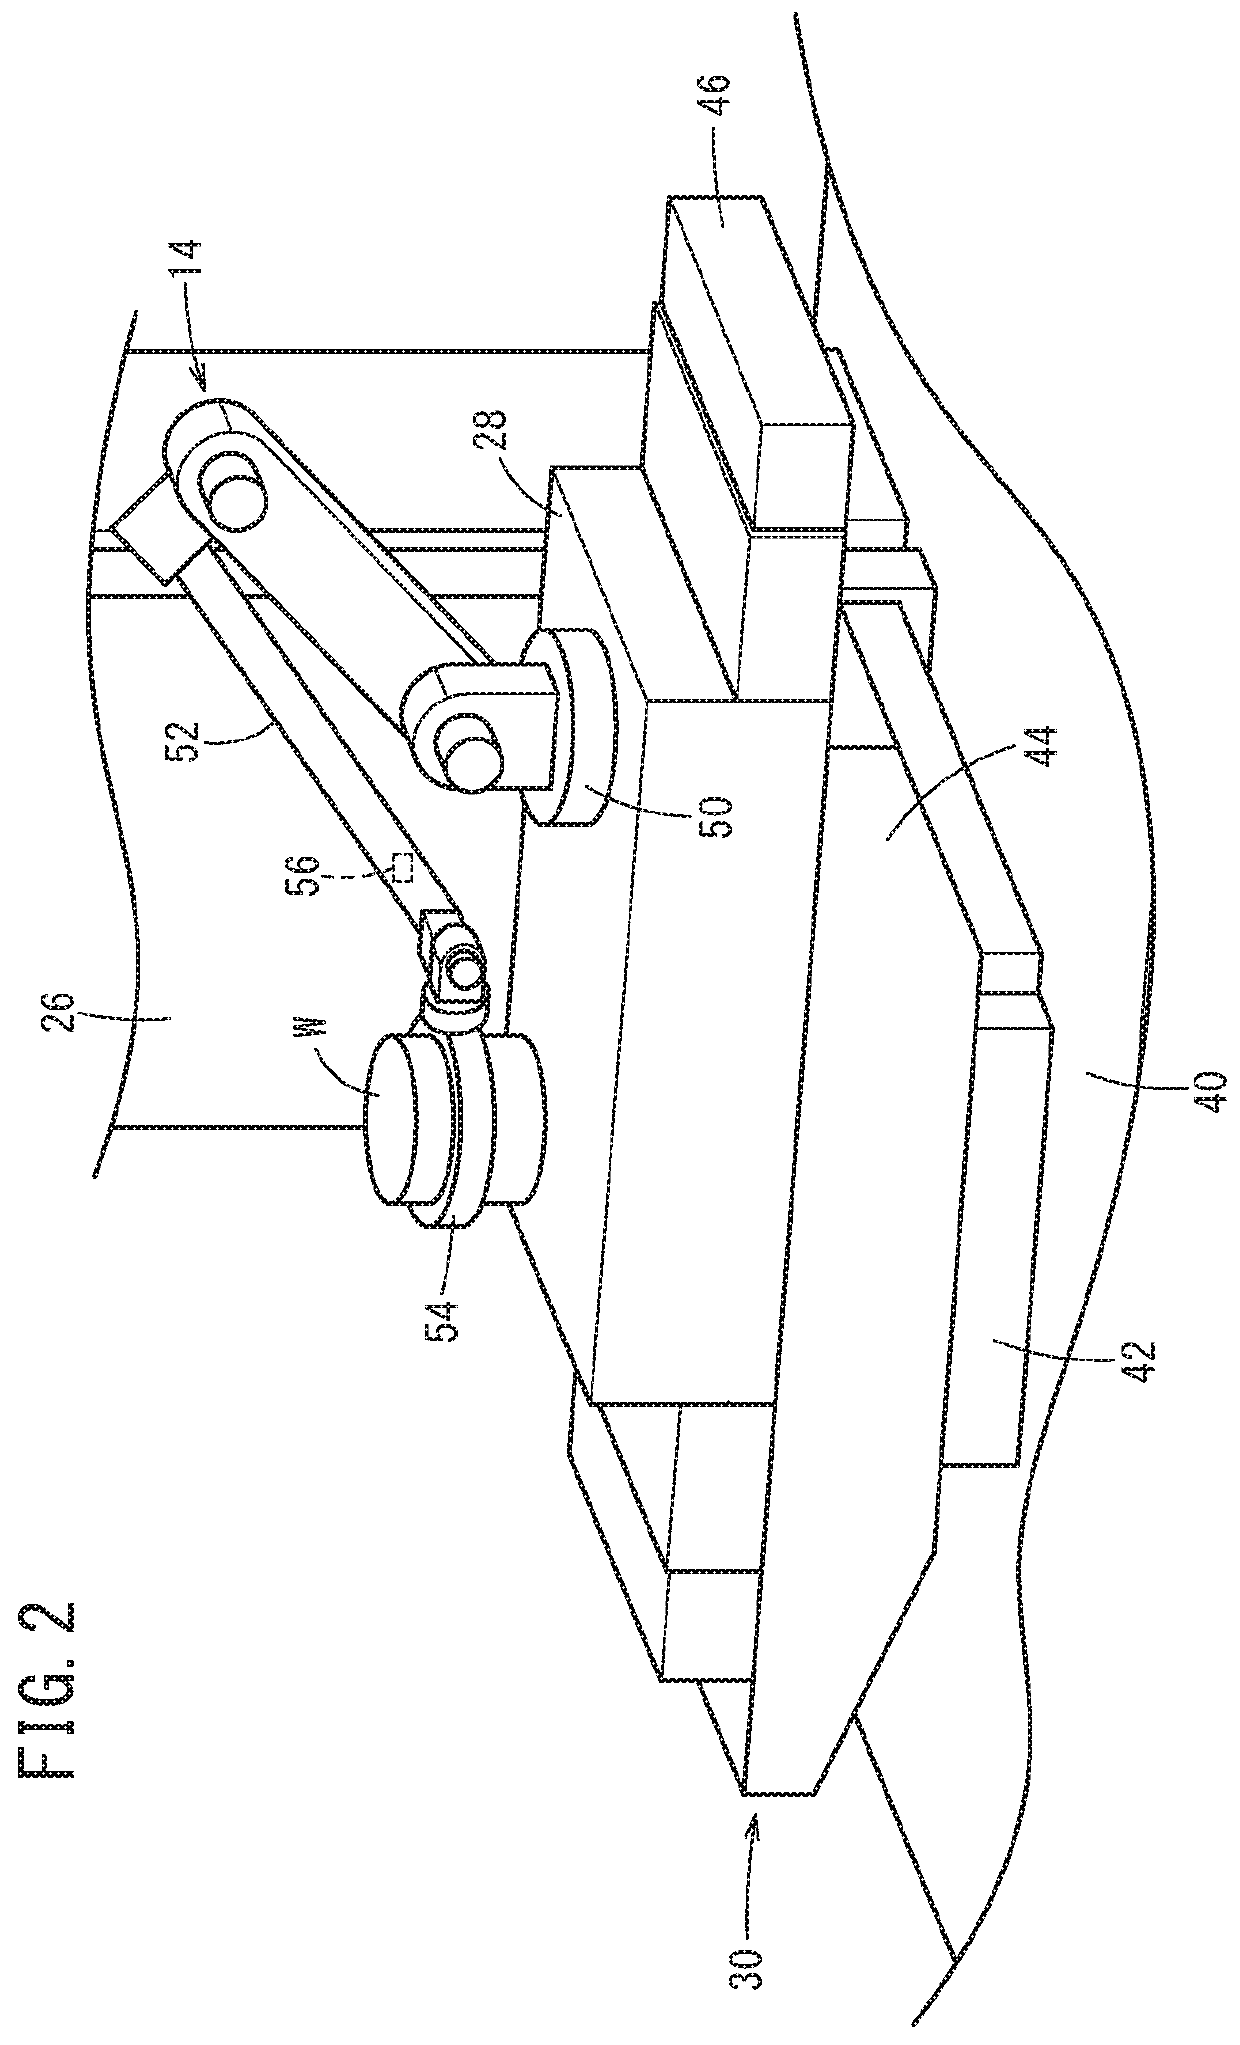 Machine tool system and clamping method